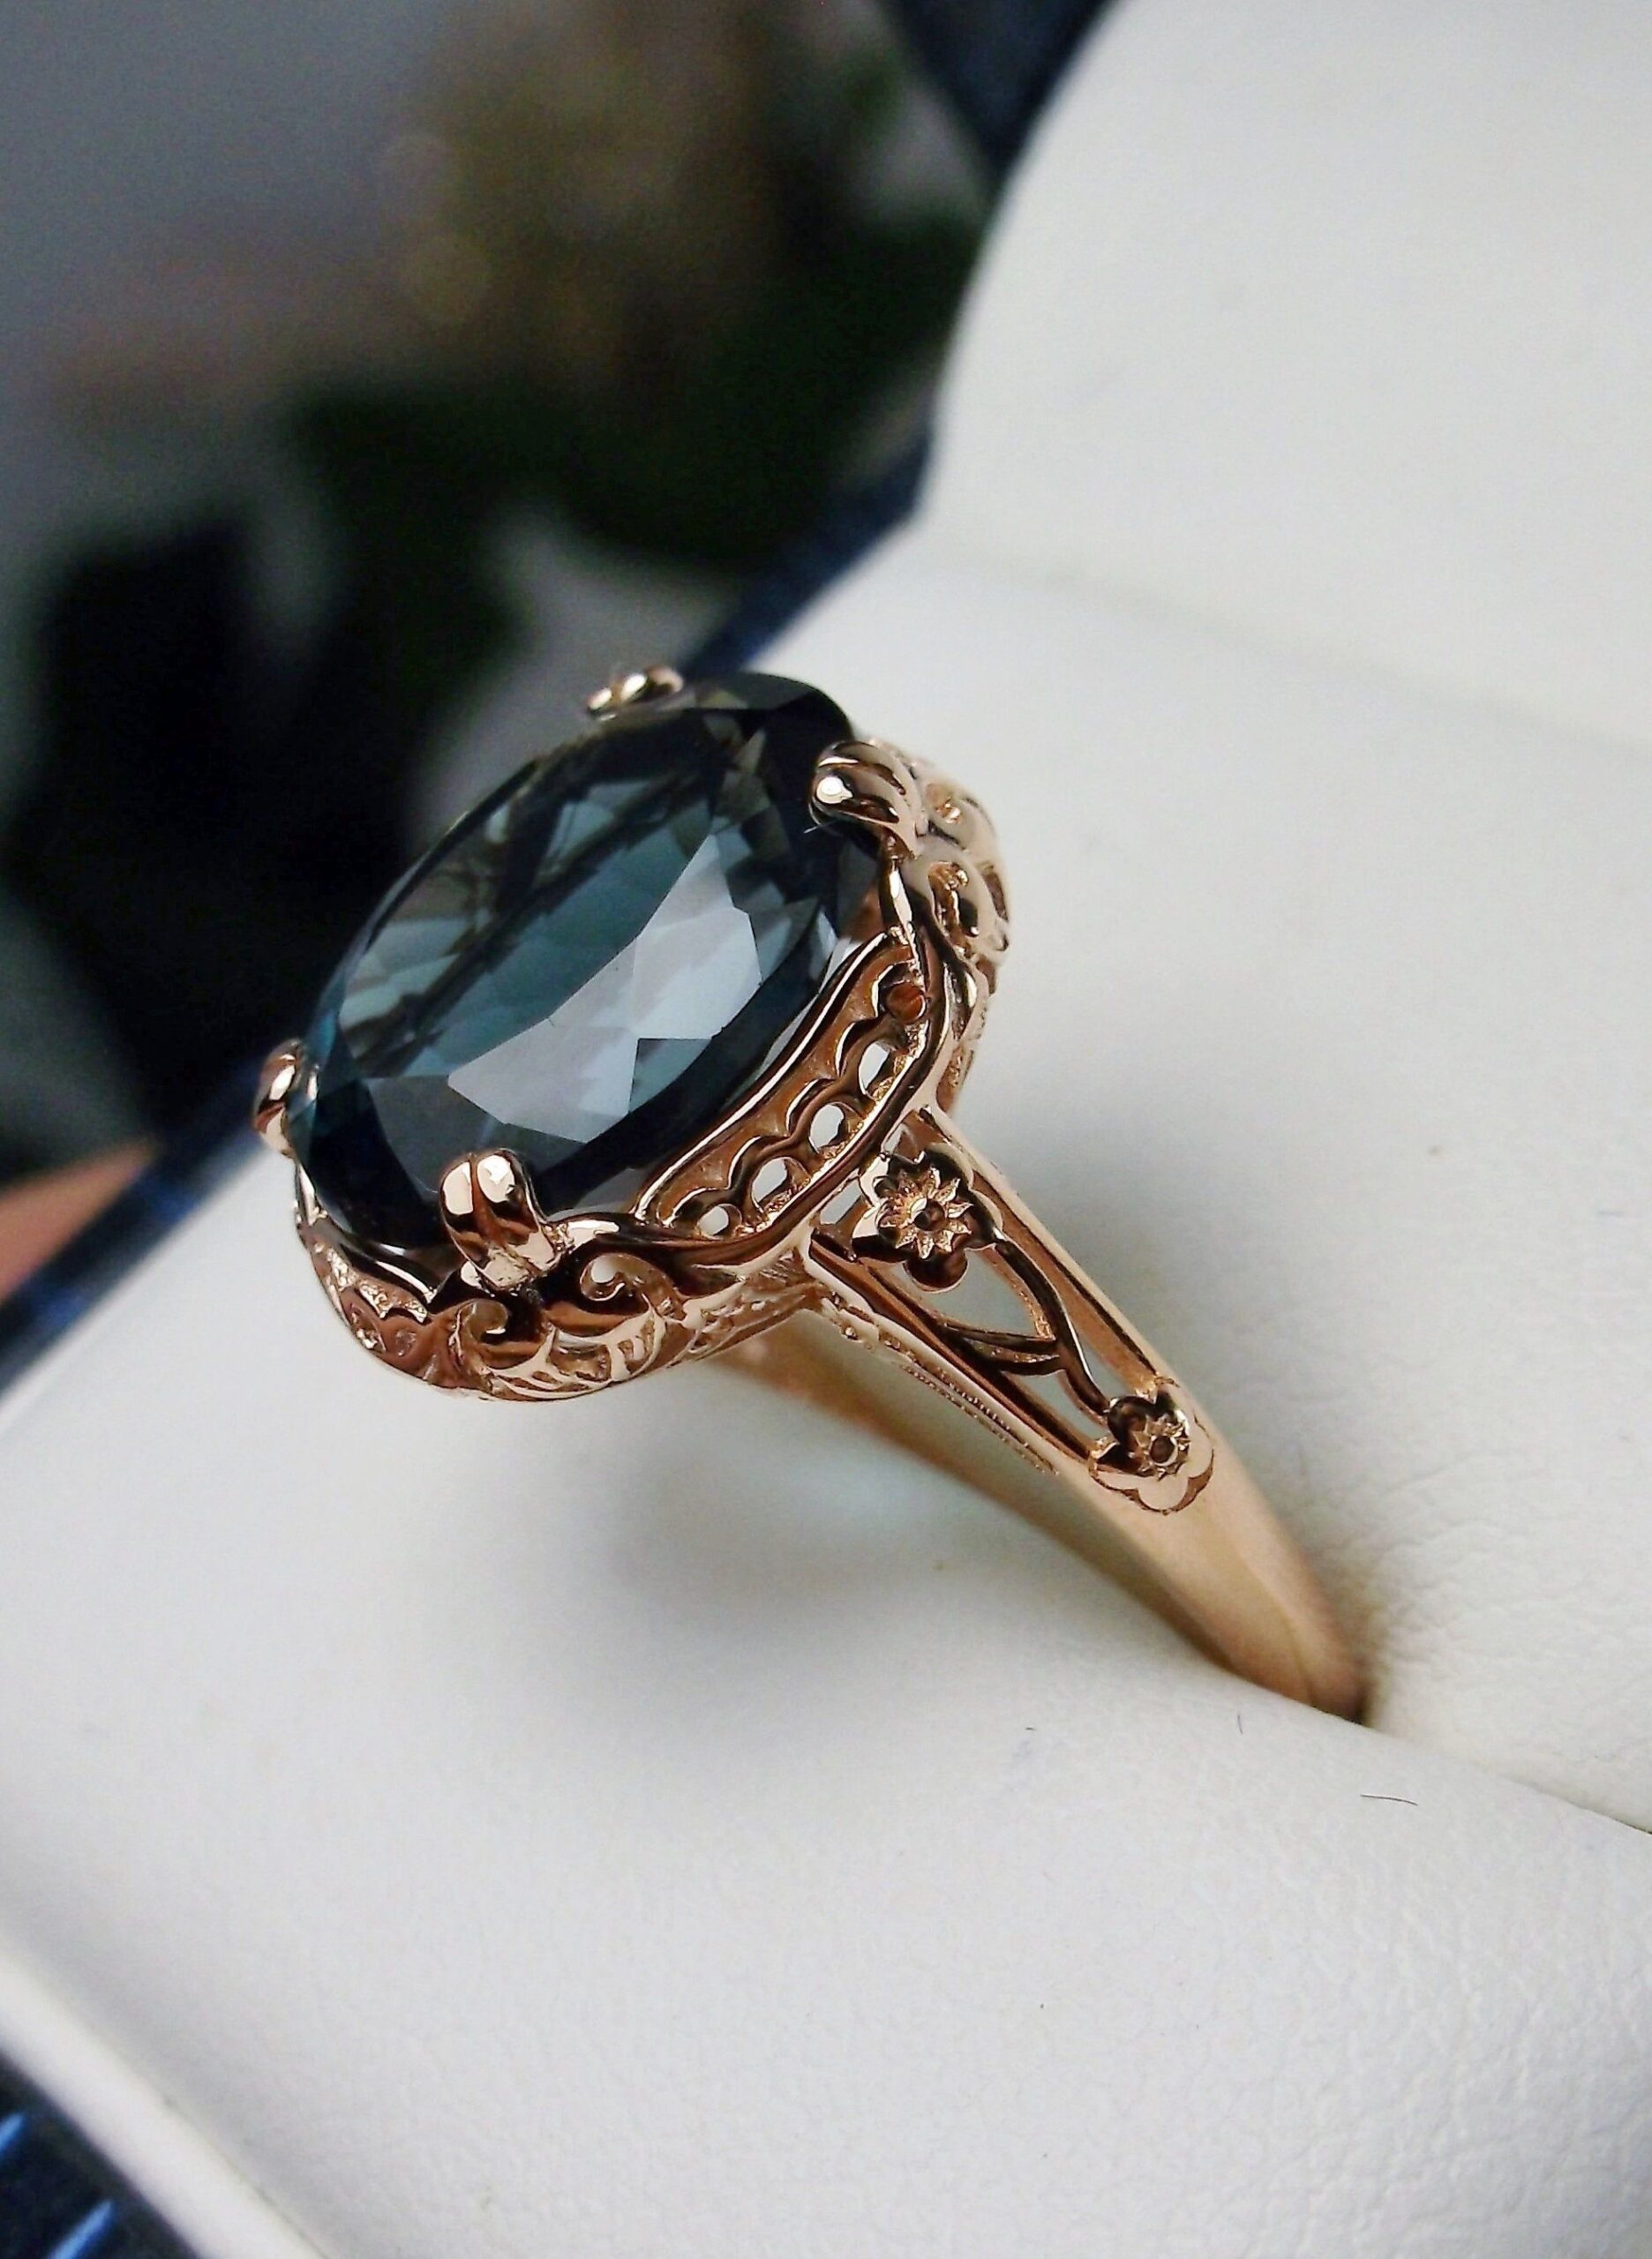 Blue topaz rings a beautiful and unique selection